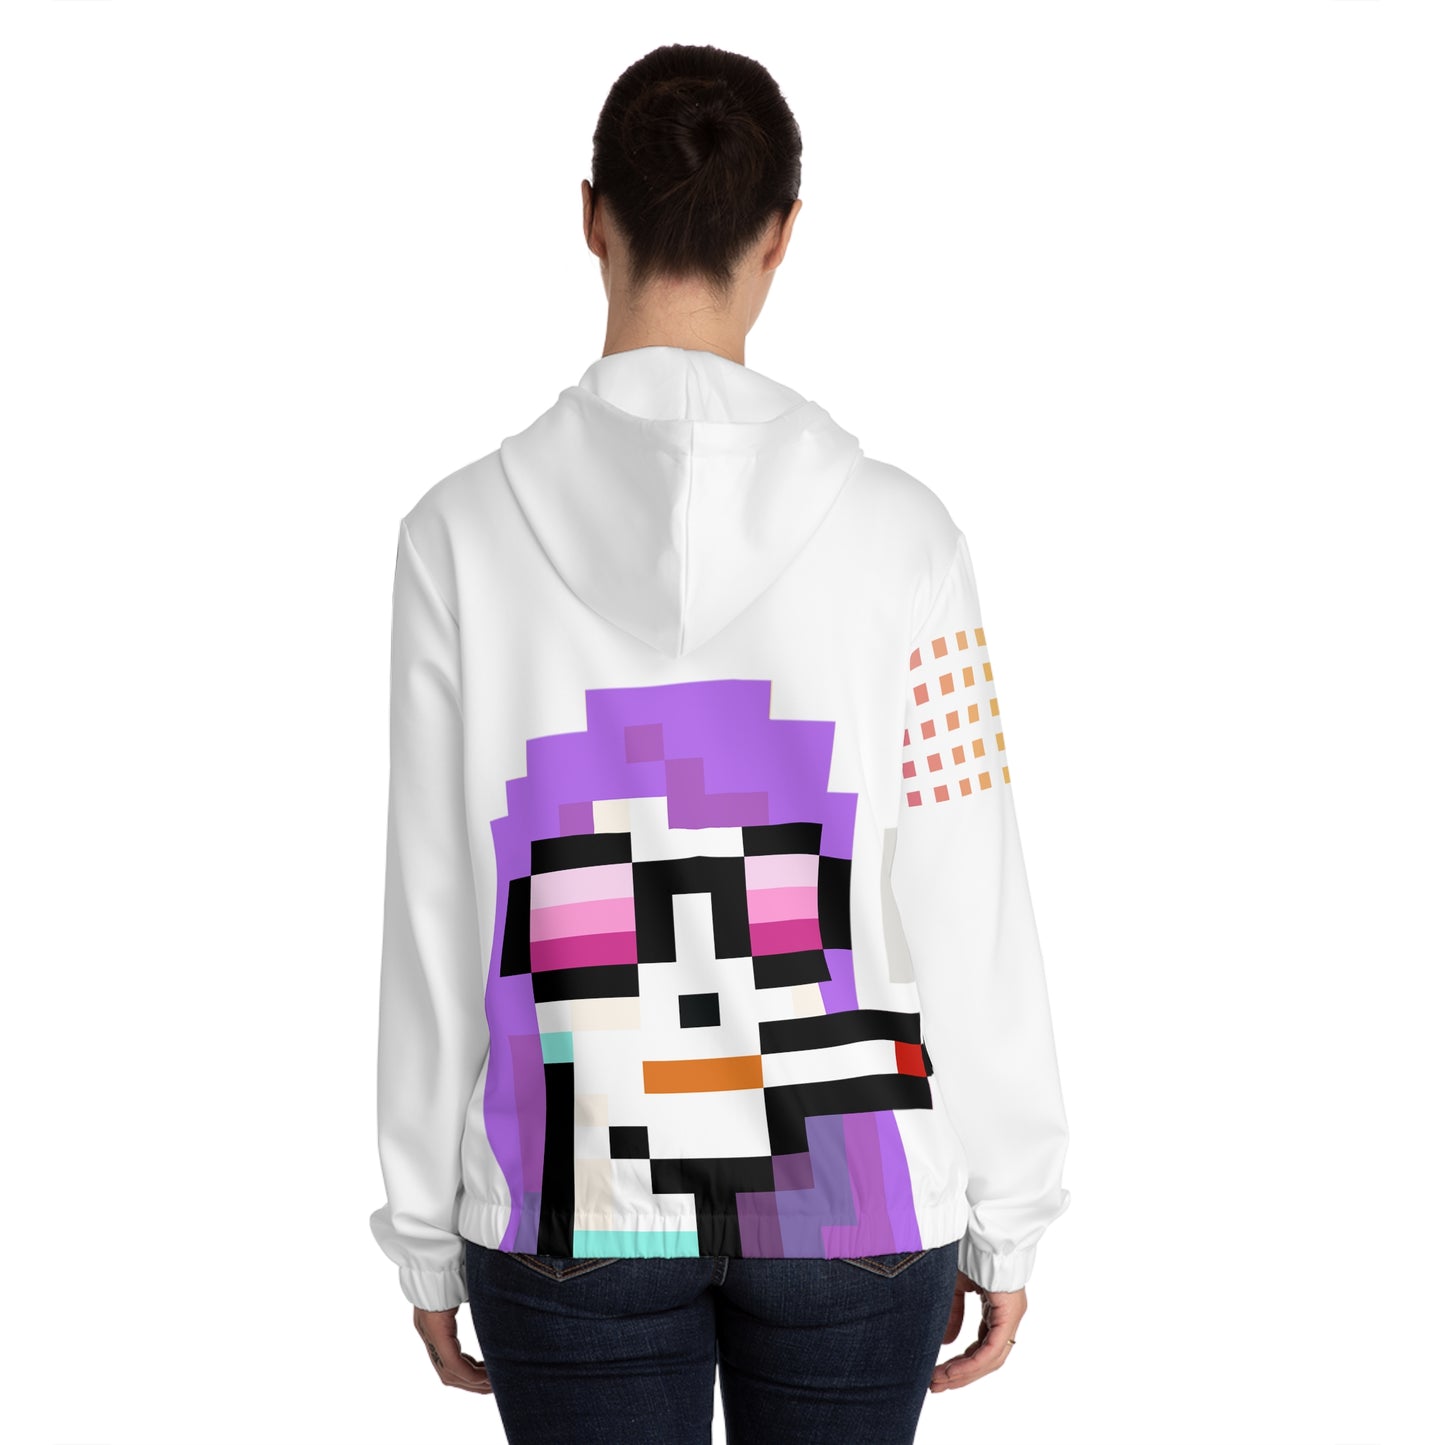 Paladin Punks Hoodie White Solid Sublimation Dye